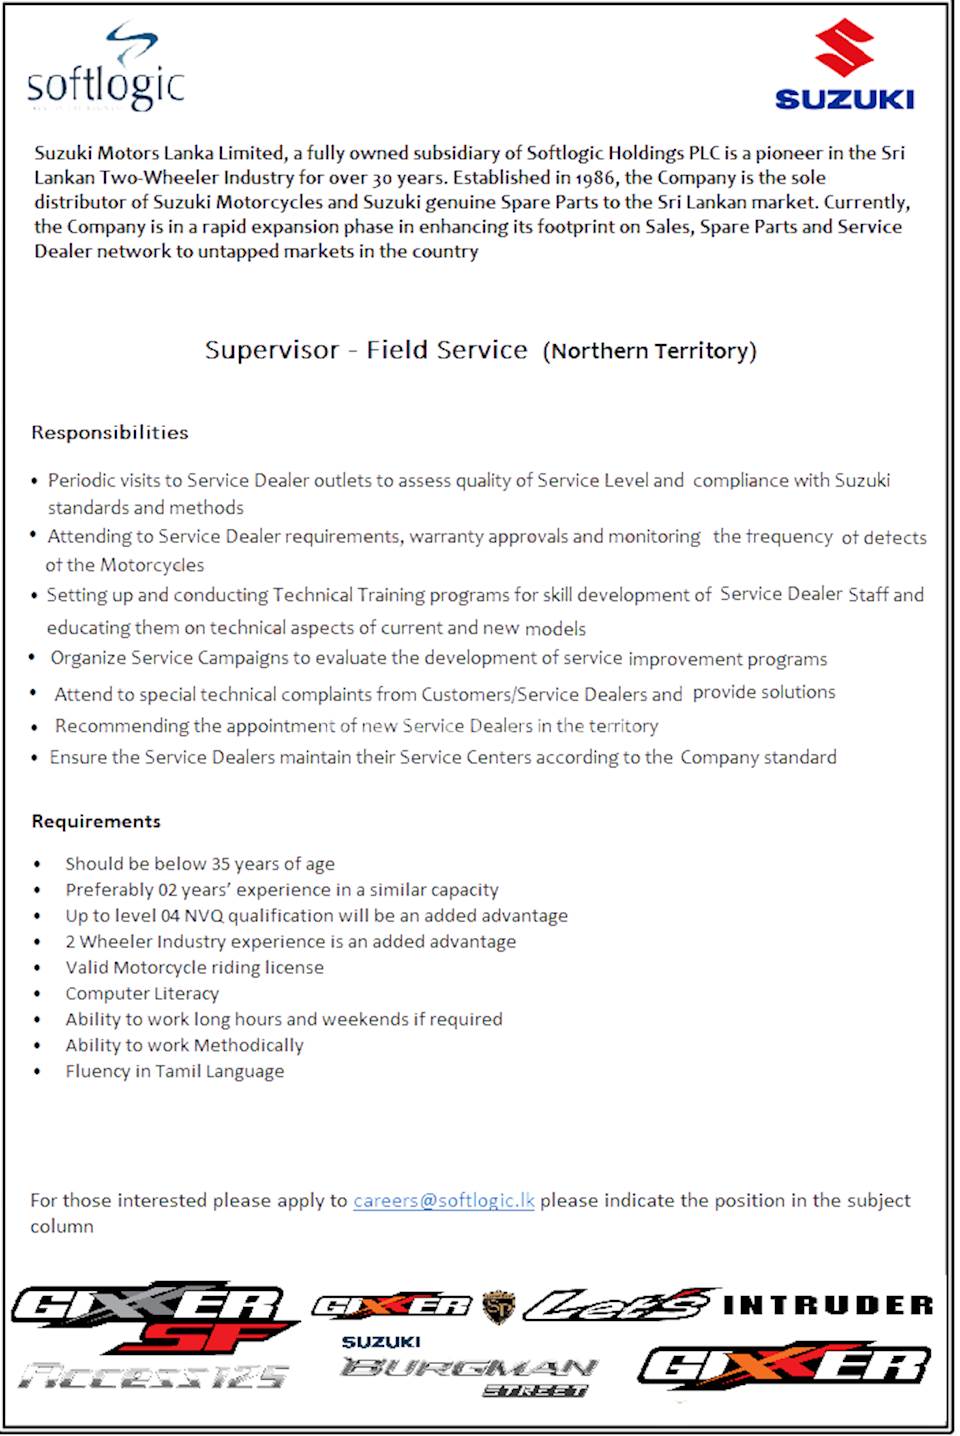 Supervisor - Field Service (Northern Territory)